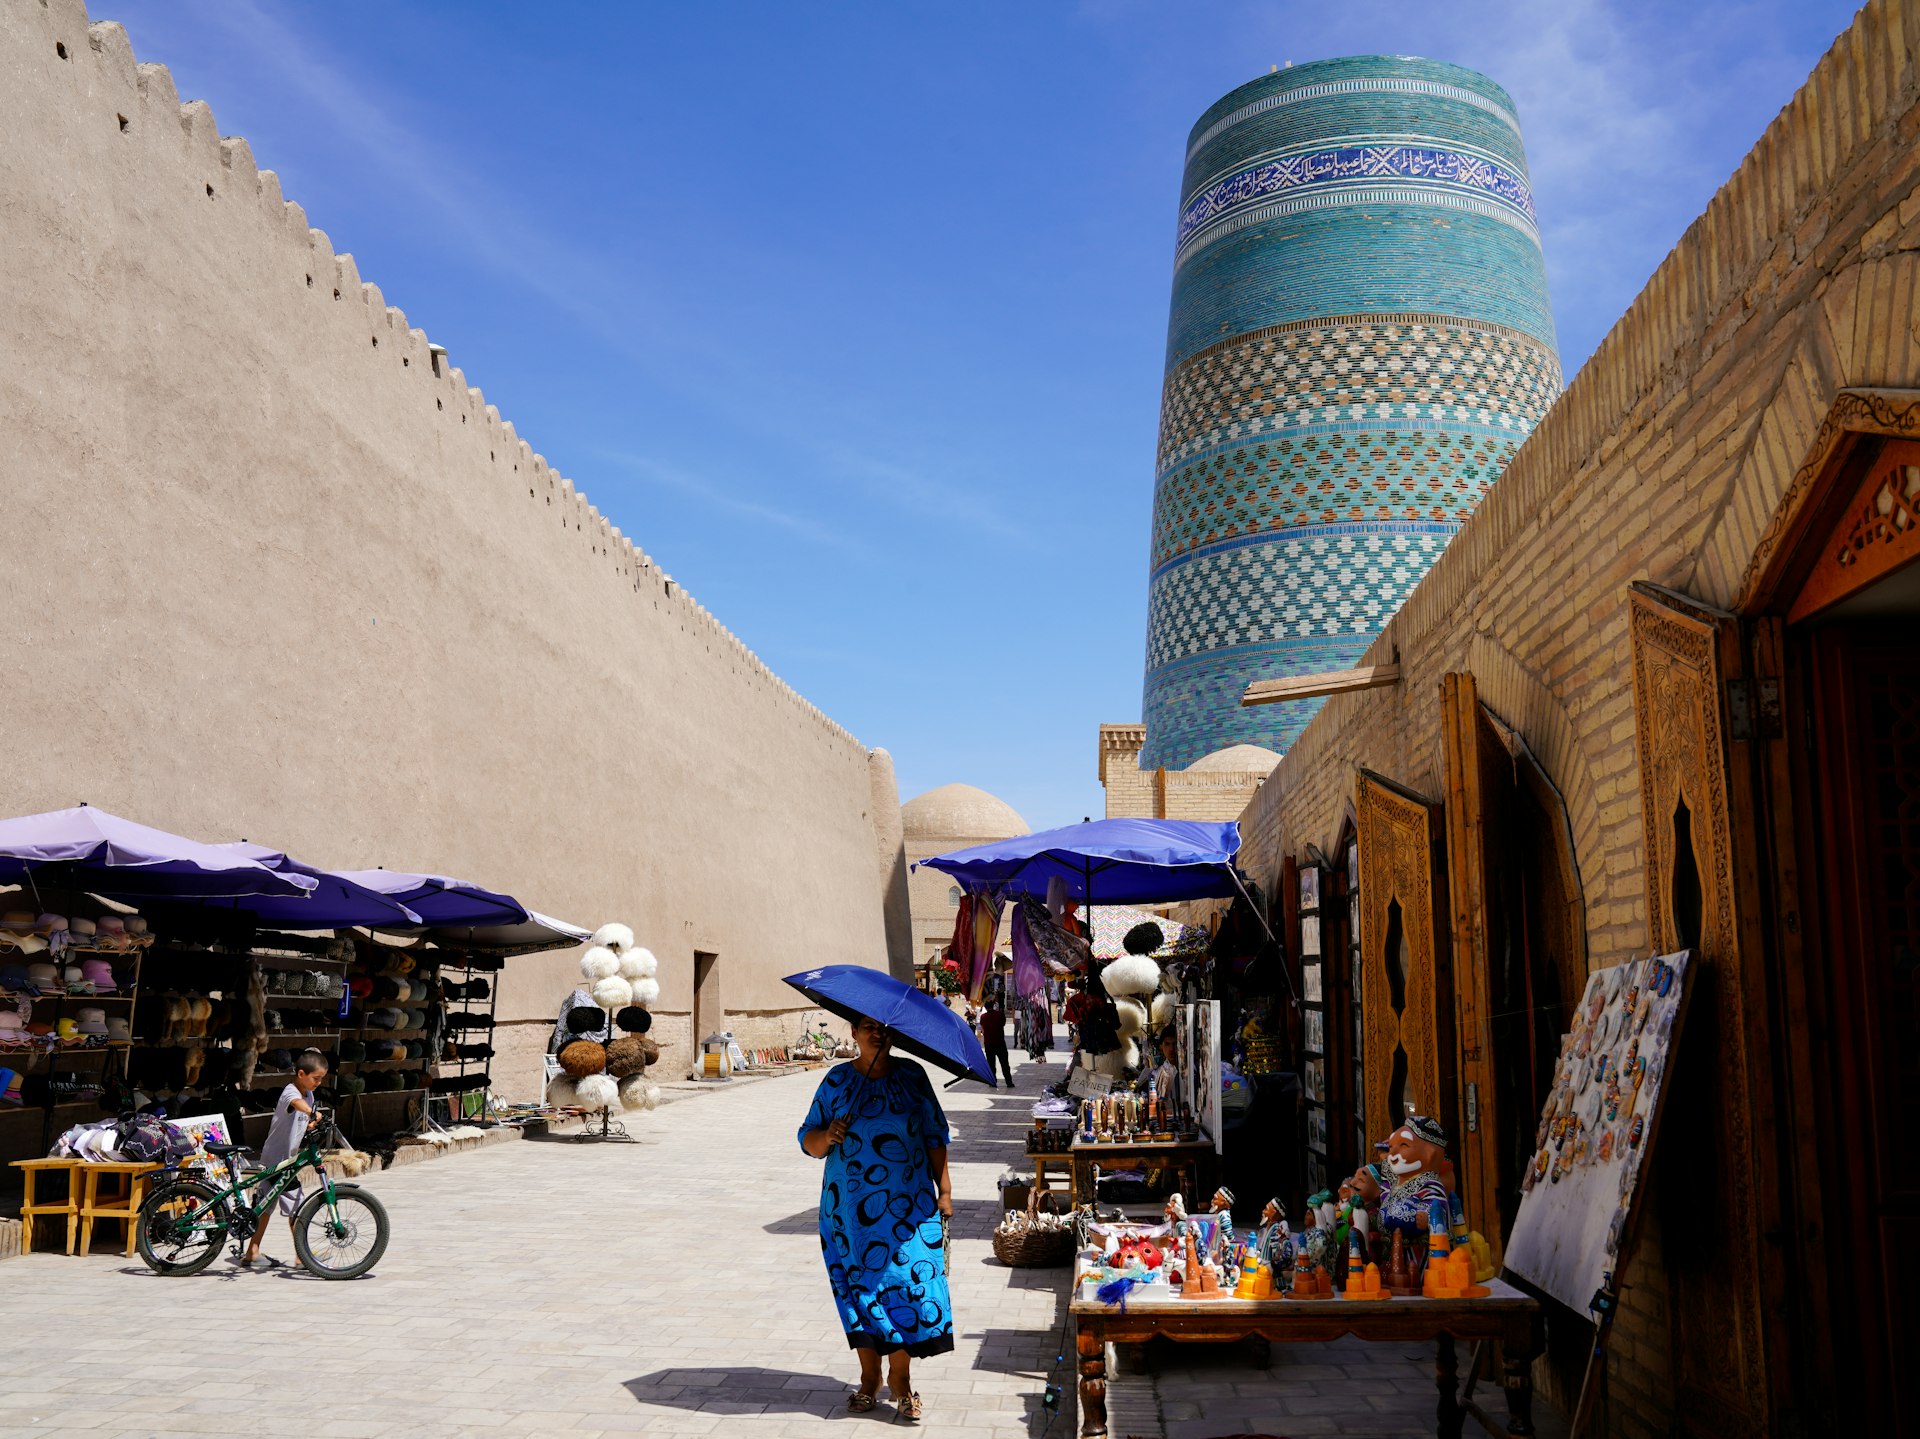 A woman walks by shops with a minaret in the distance, Khiva, Uzbekistan